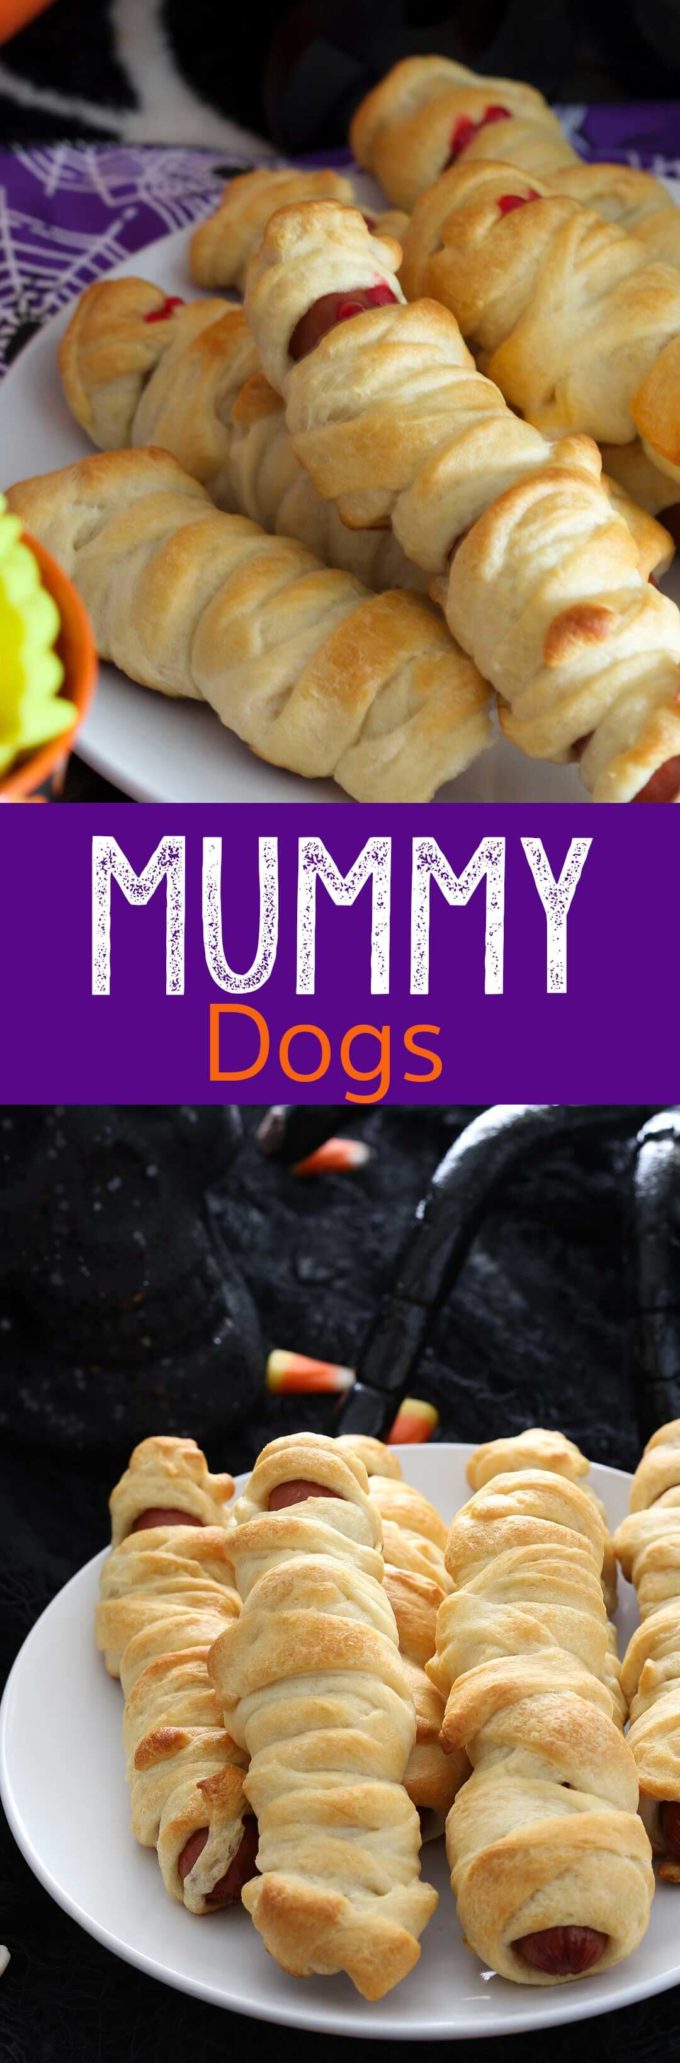 Mummy Dogs, are a perfect meal for Halloween night and lots of fun for the kids! Mummy Dogs are a fun, festive, and easy meal.